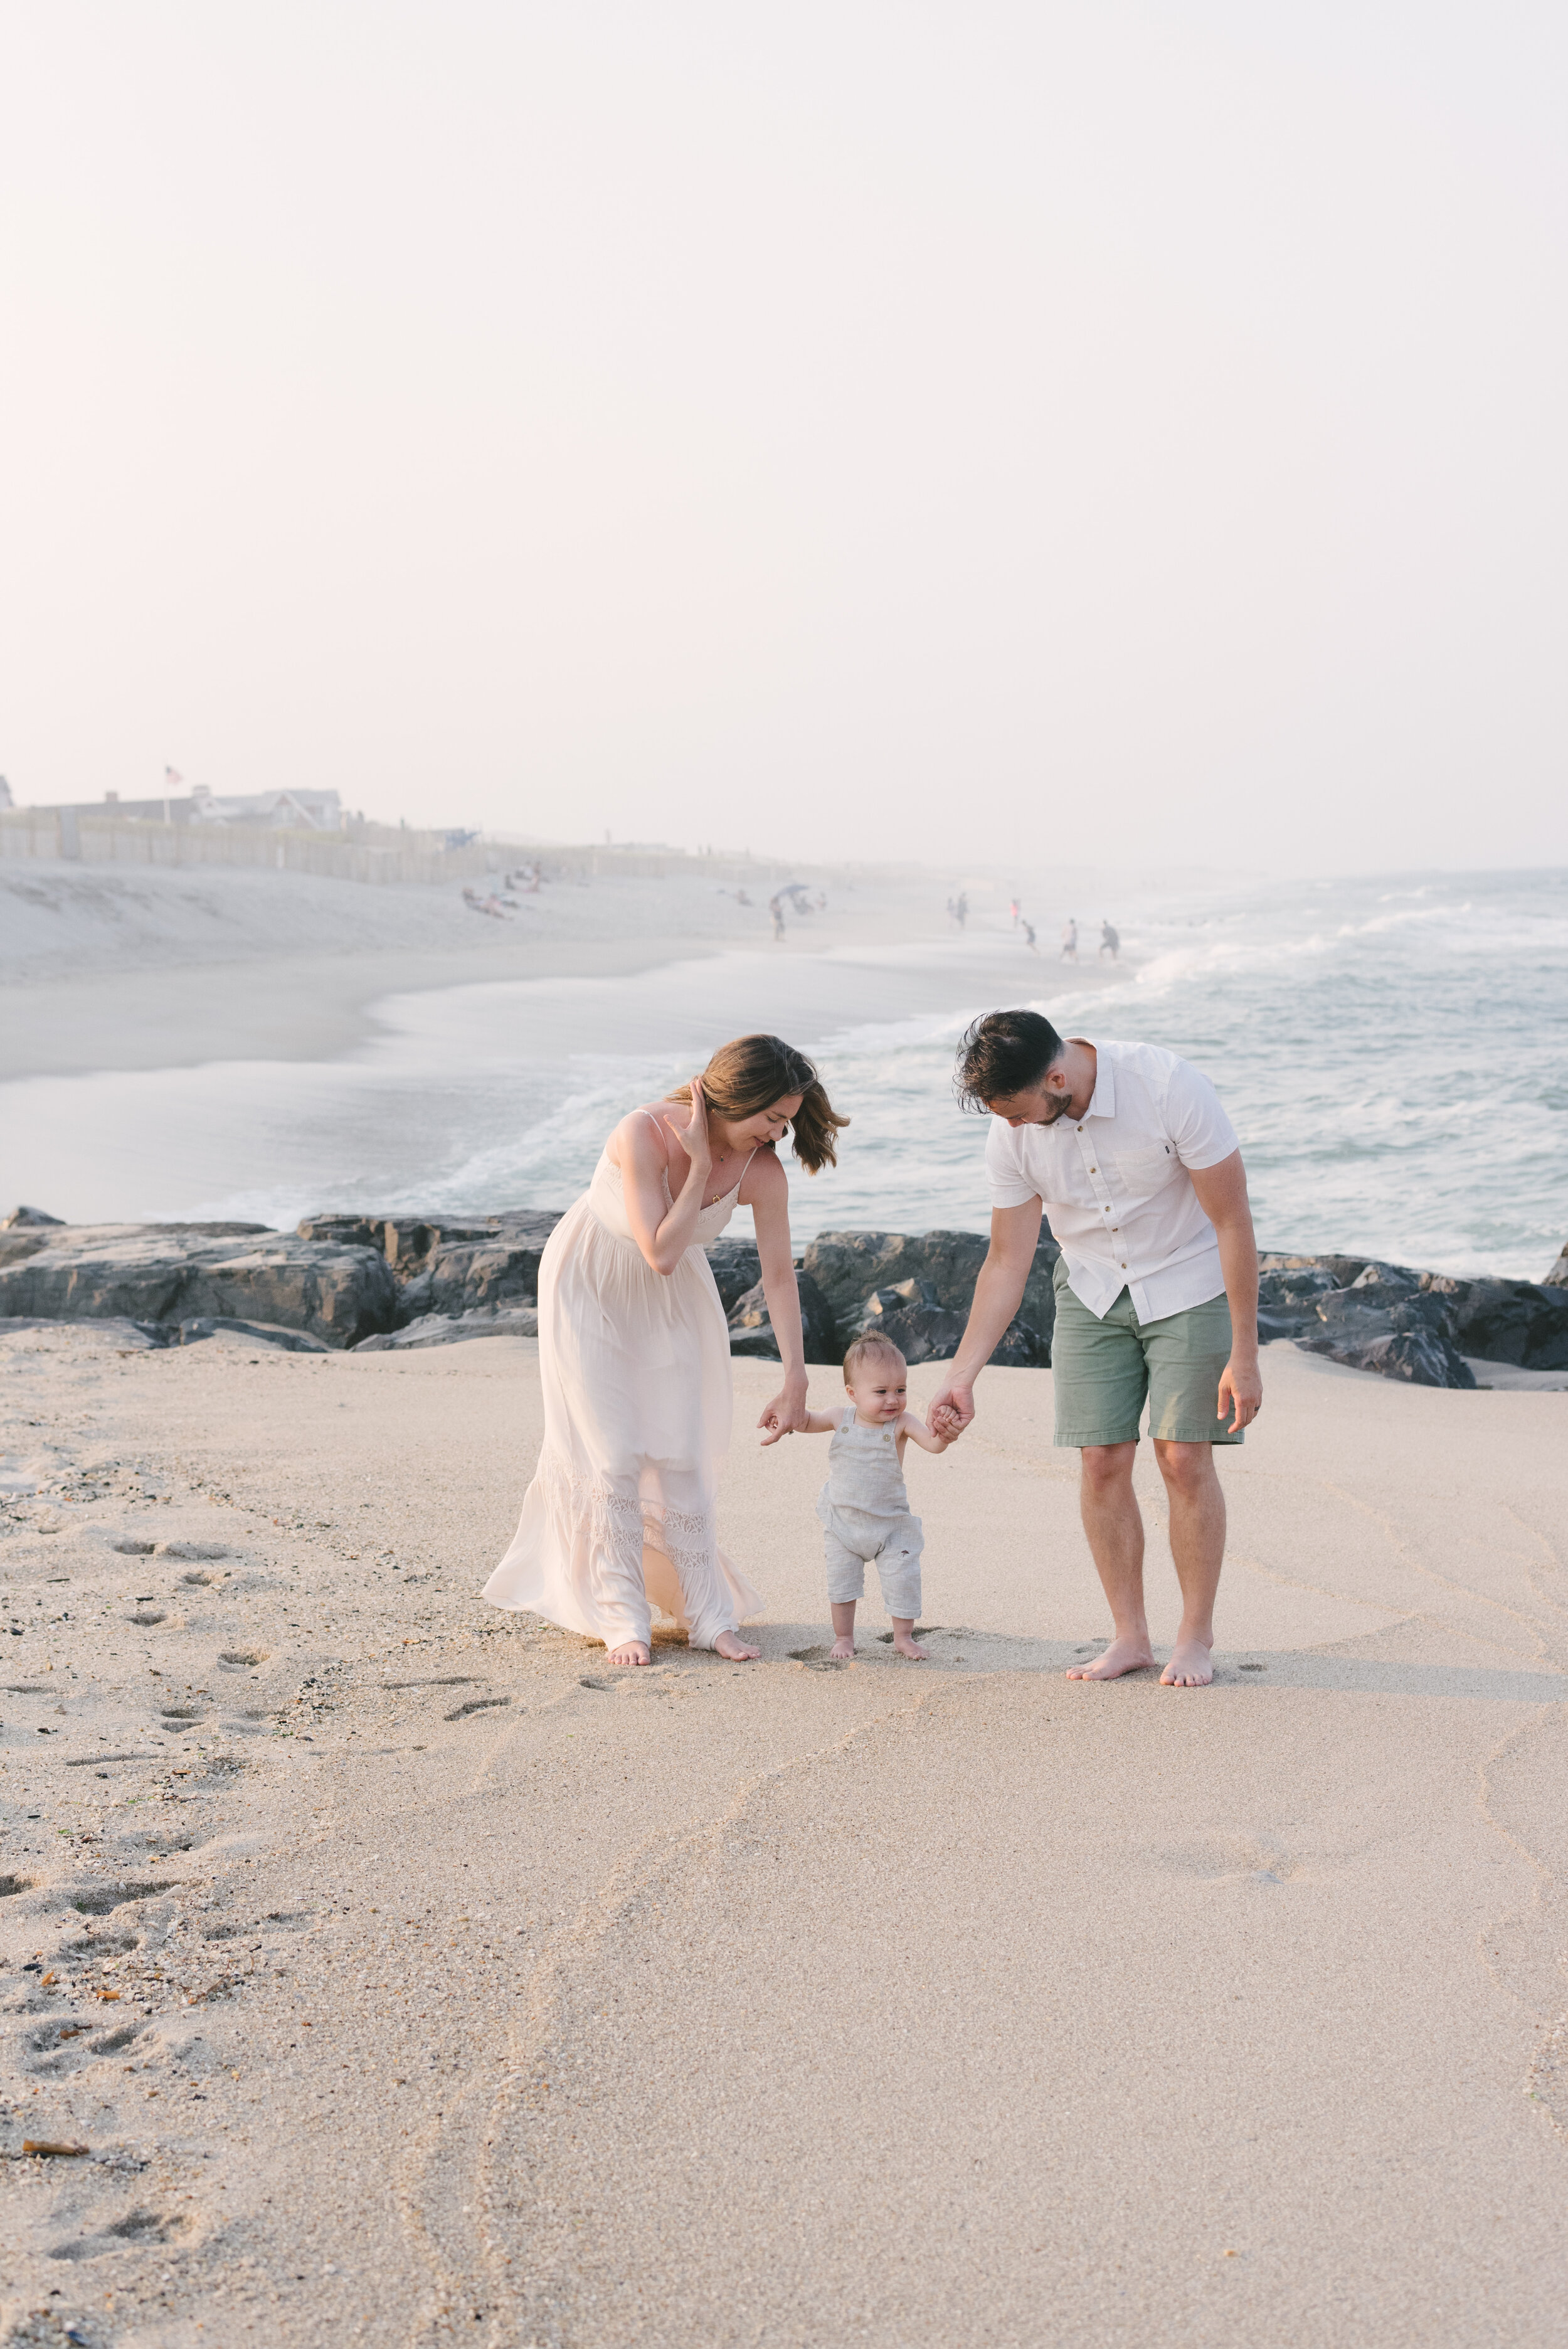 Beach photo ideas: Baby walking on beach while holding parents' hands | NKB Photo